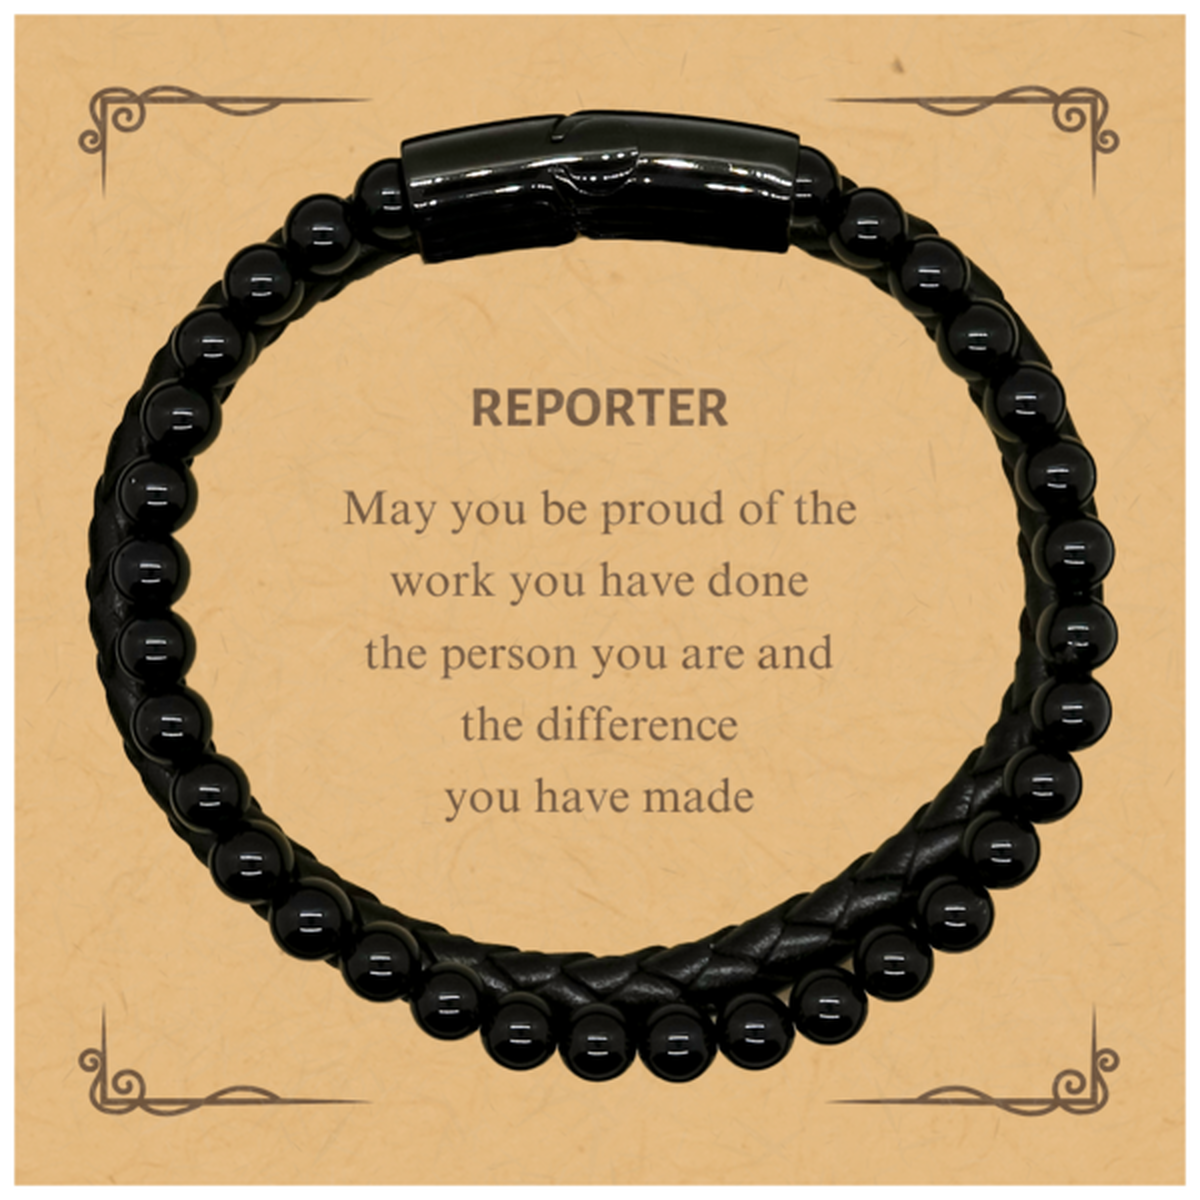 Reporter May you be proud of the work you have done, Retirement Reporter Stone Leather Bracelets for Colleague Appreciation Gifts Amazing for Reporter